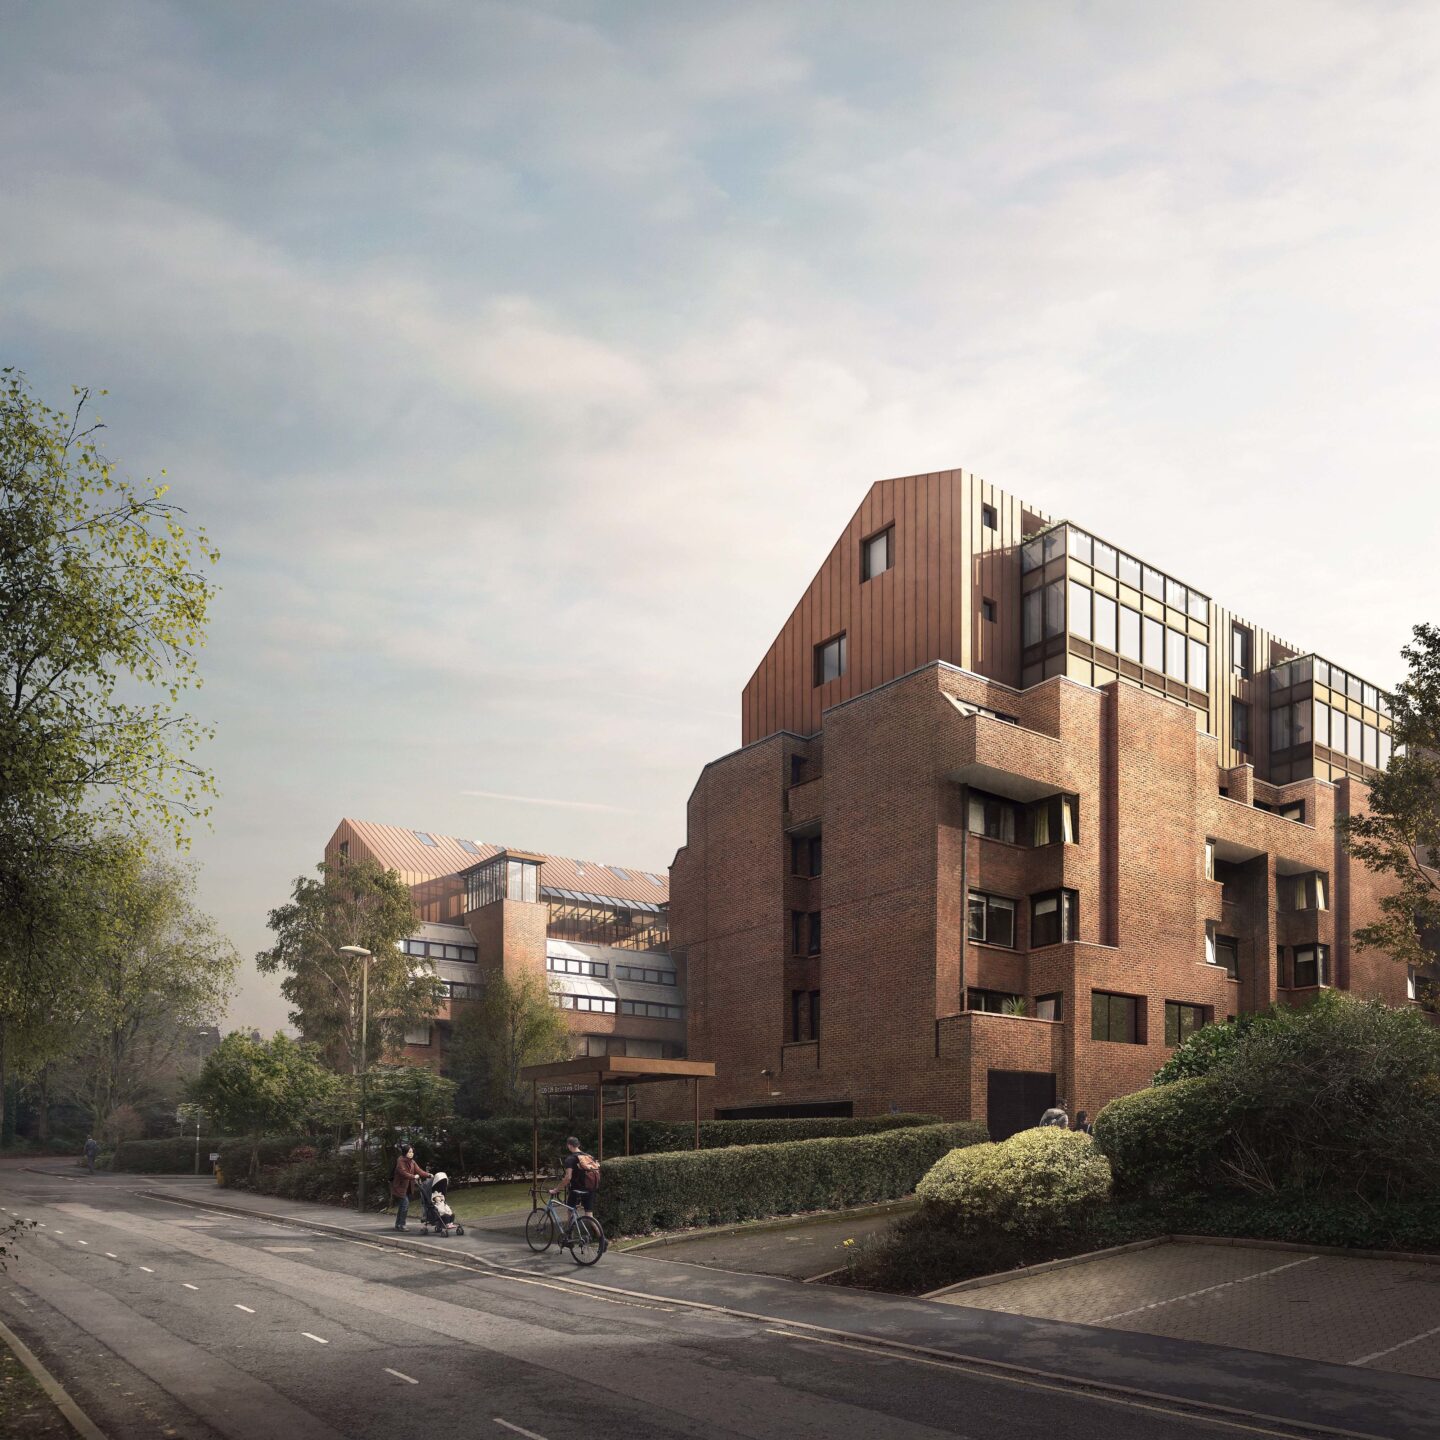 Plans submitted for rooftop flats at Golders Green estate